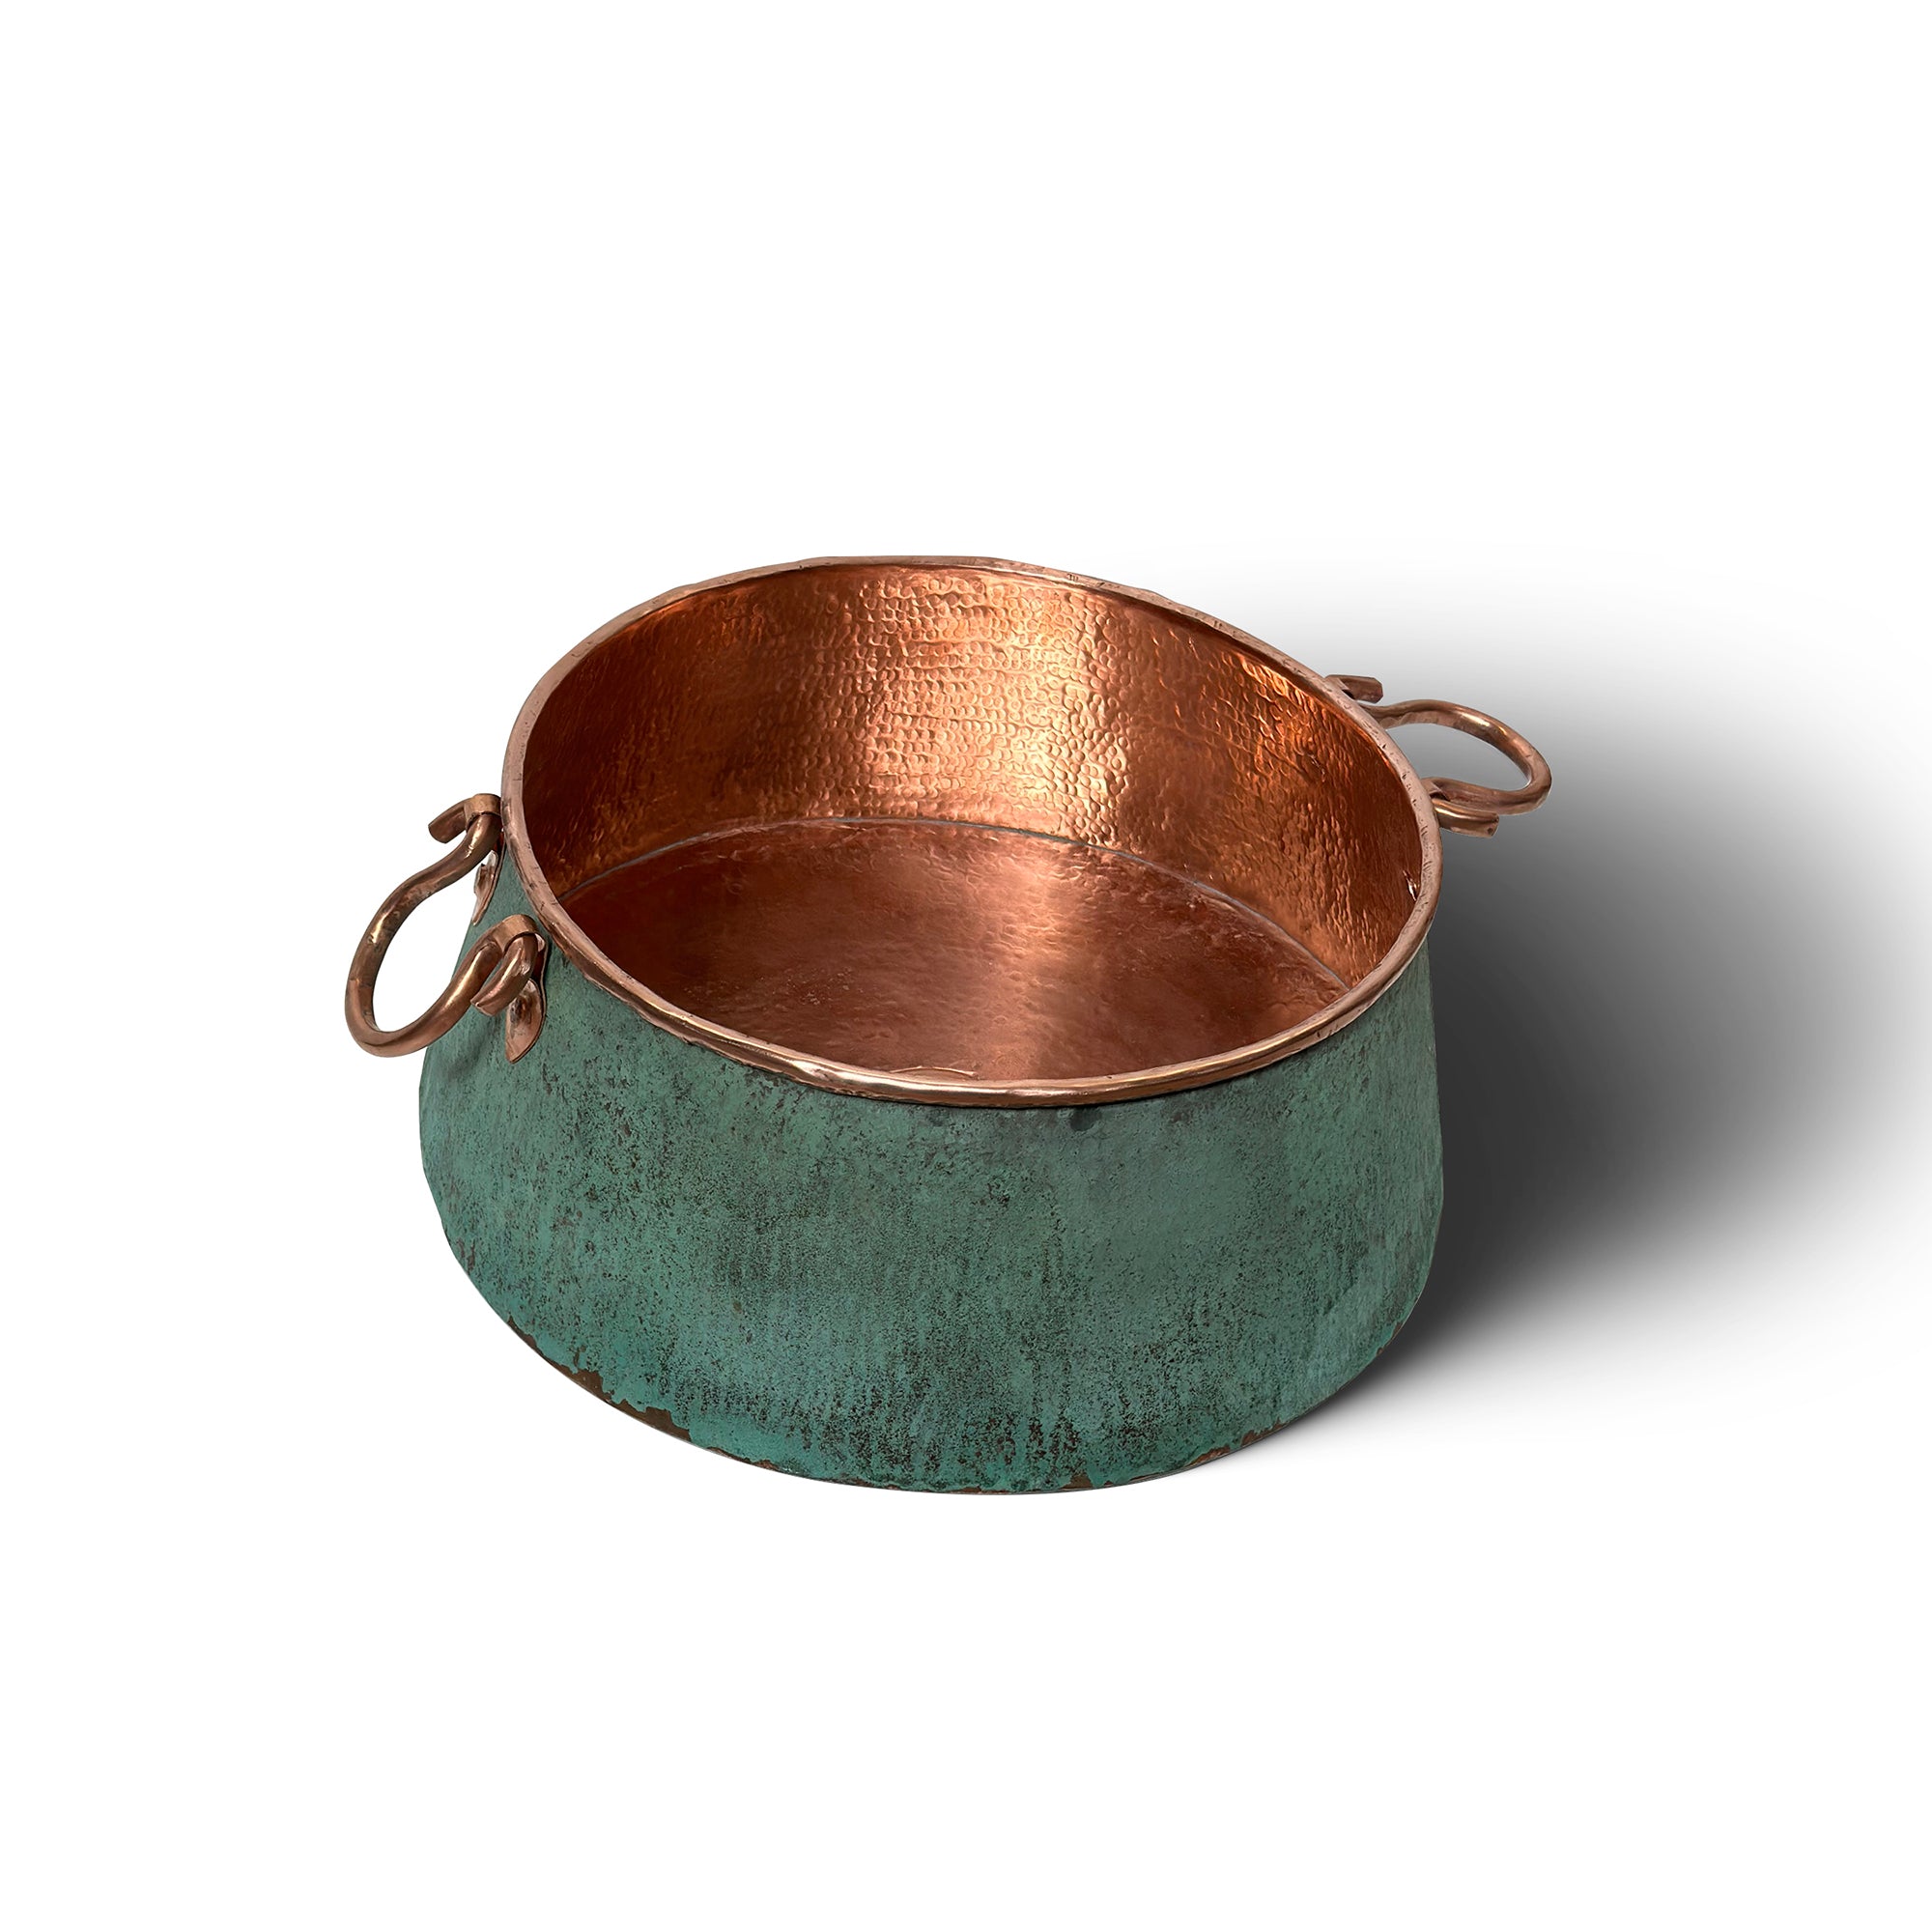  Copper Sink with Handles